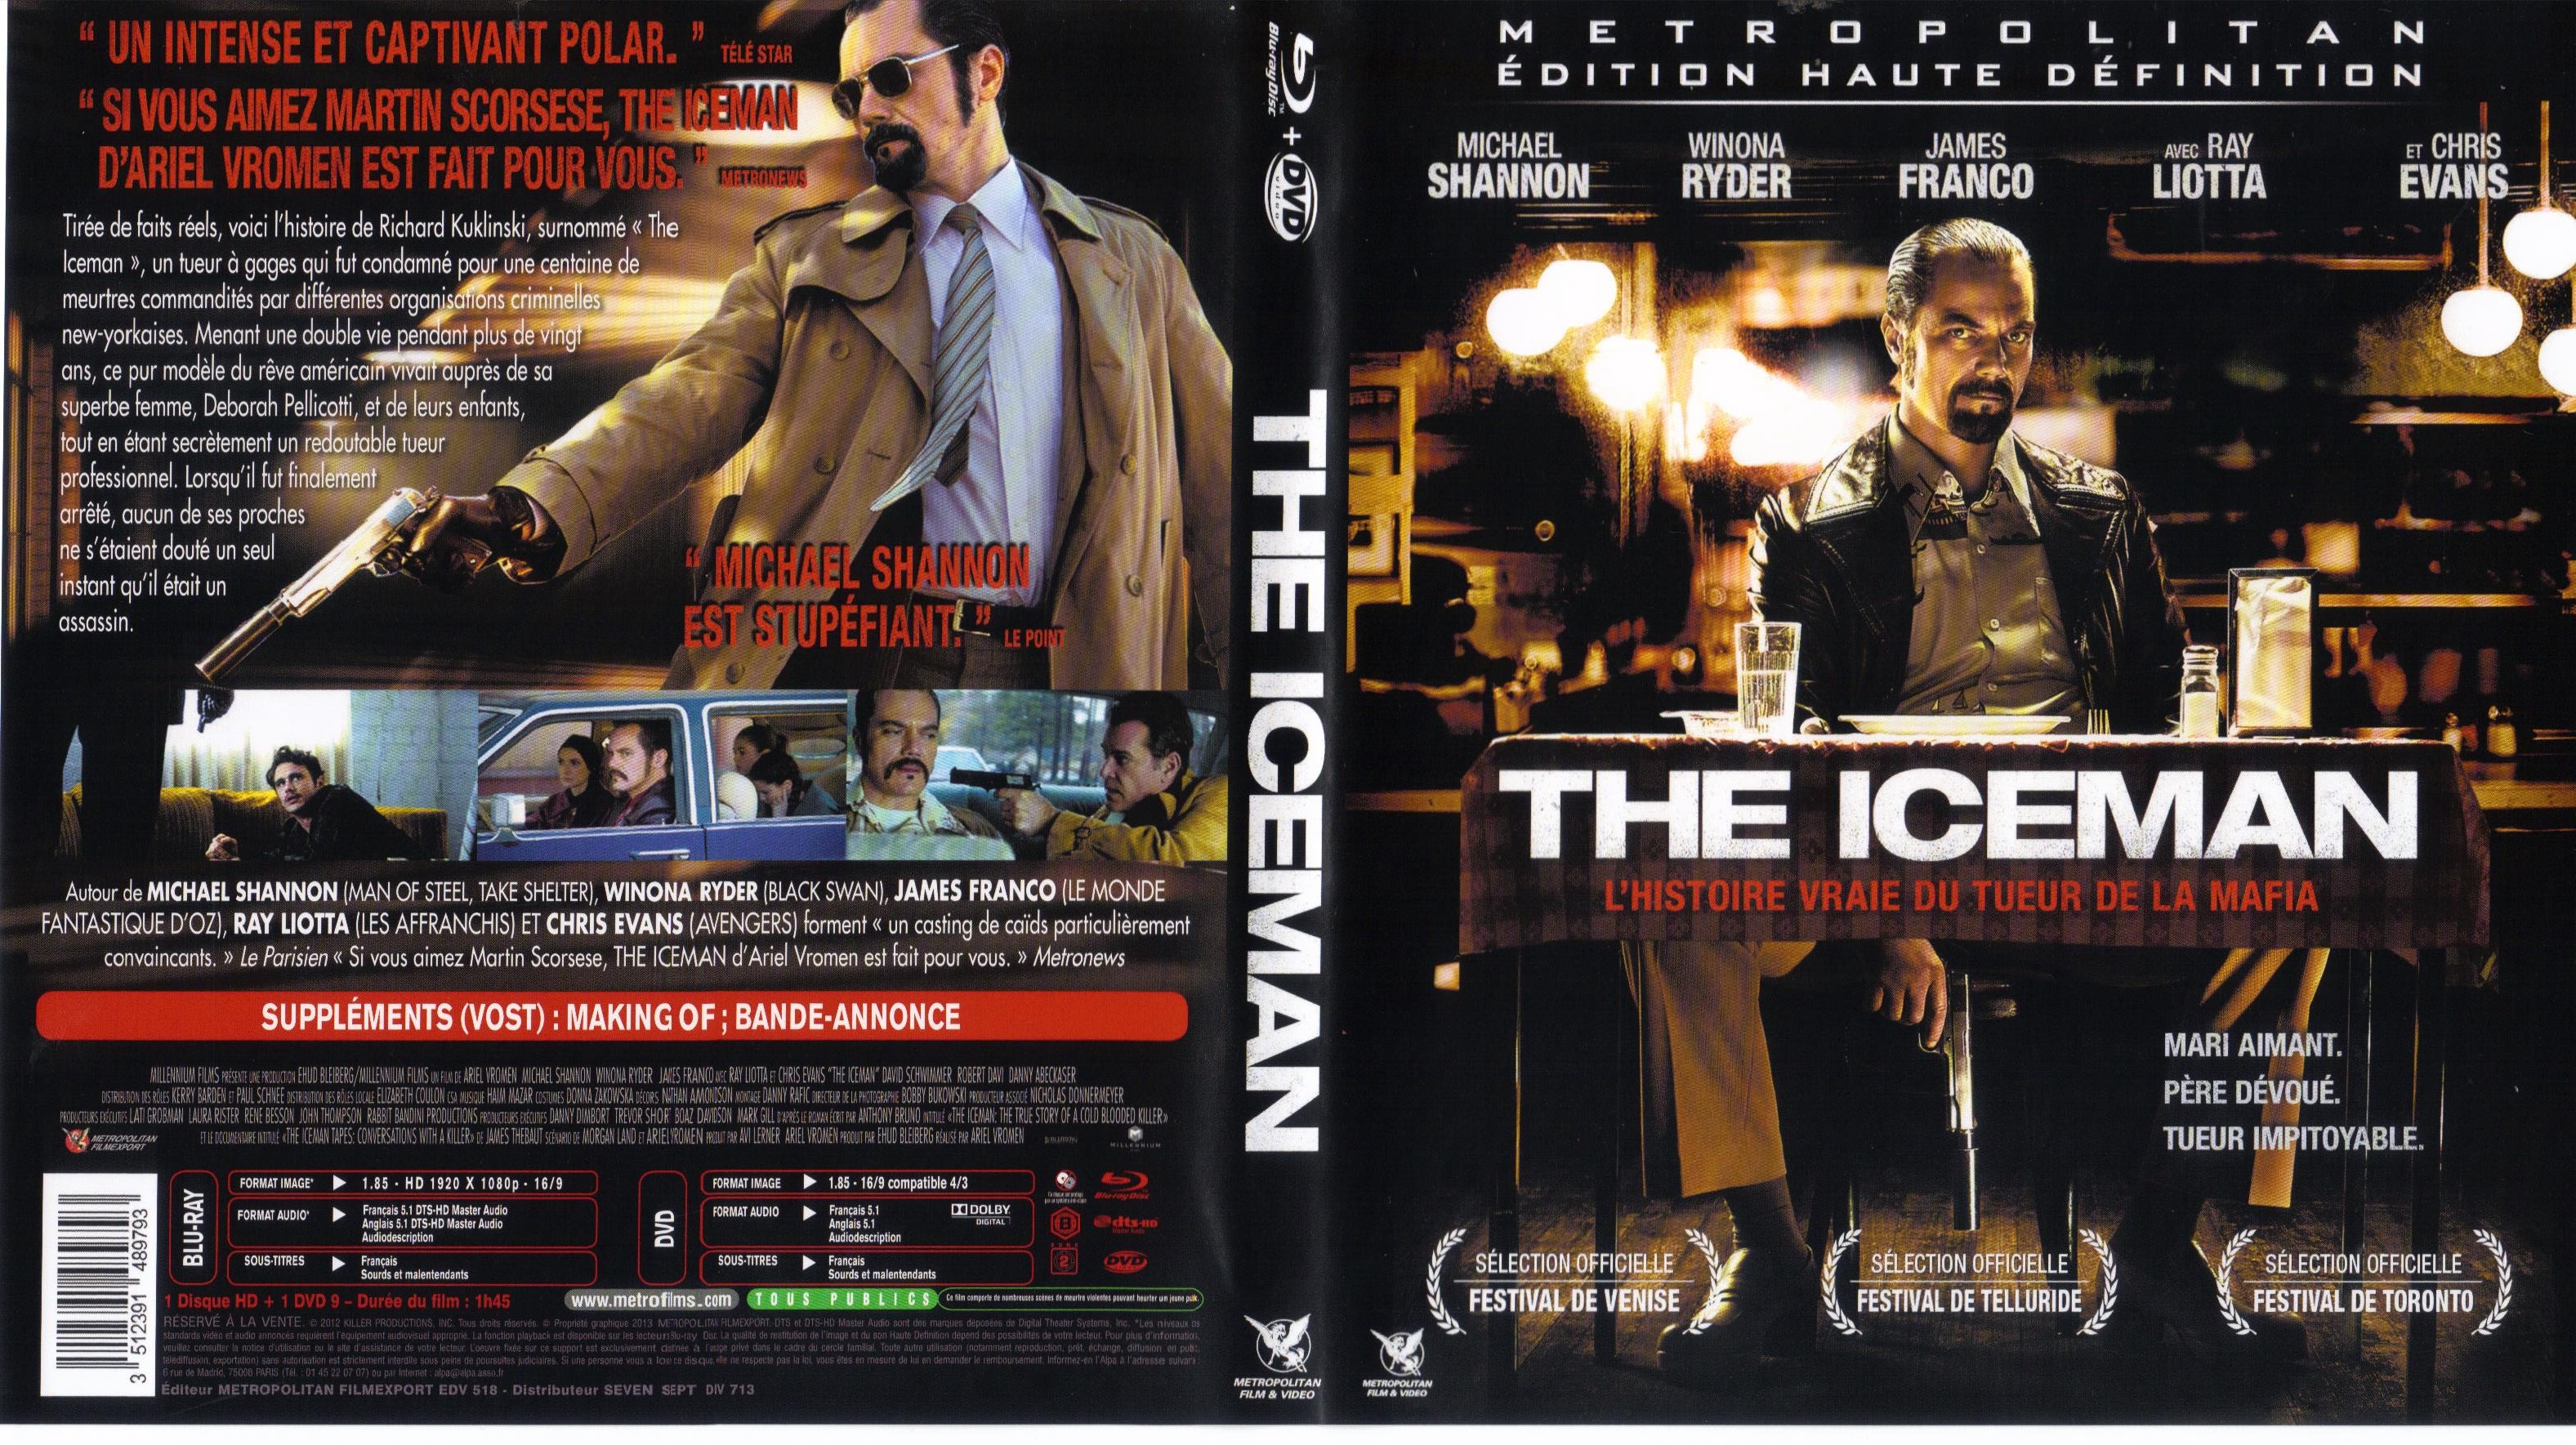 Jaquette DVD The Iceman (BLU-RAY)